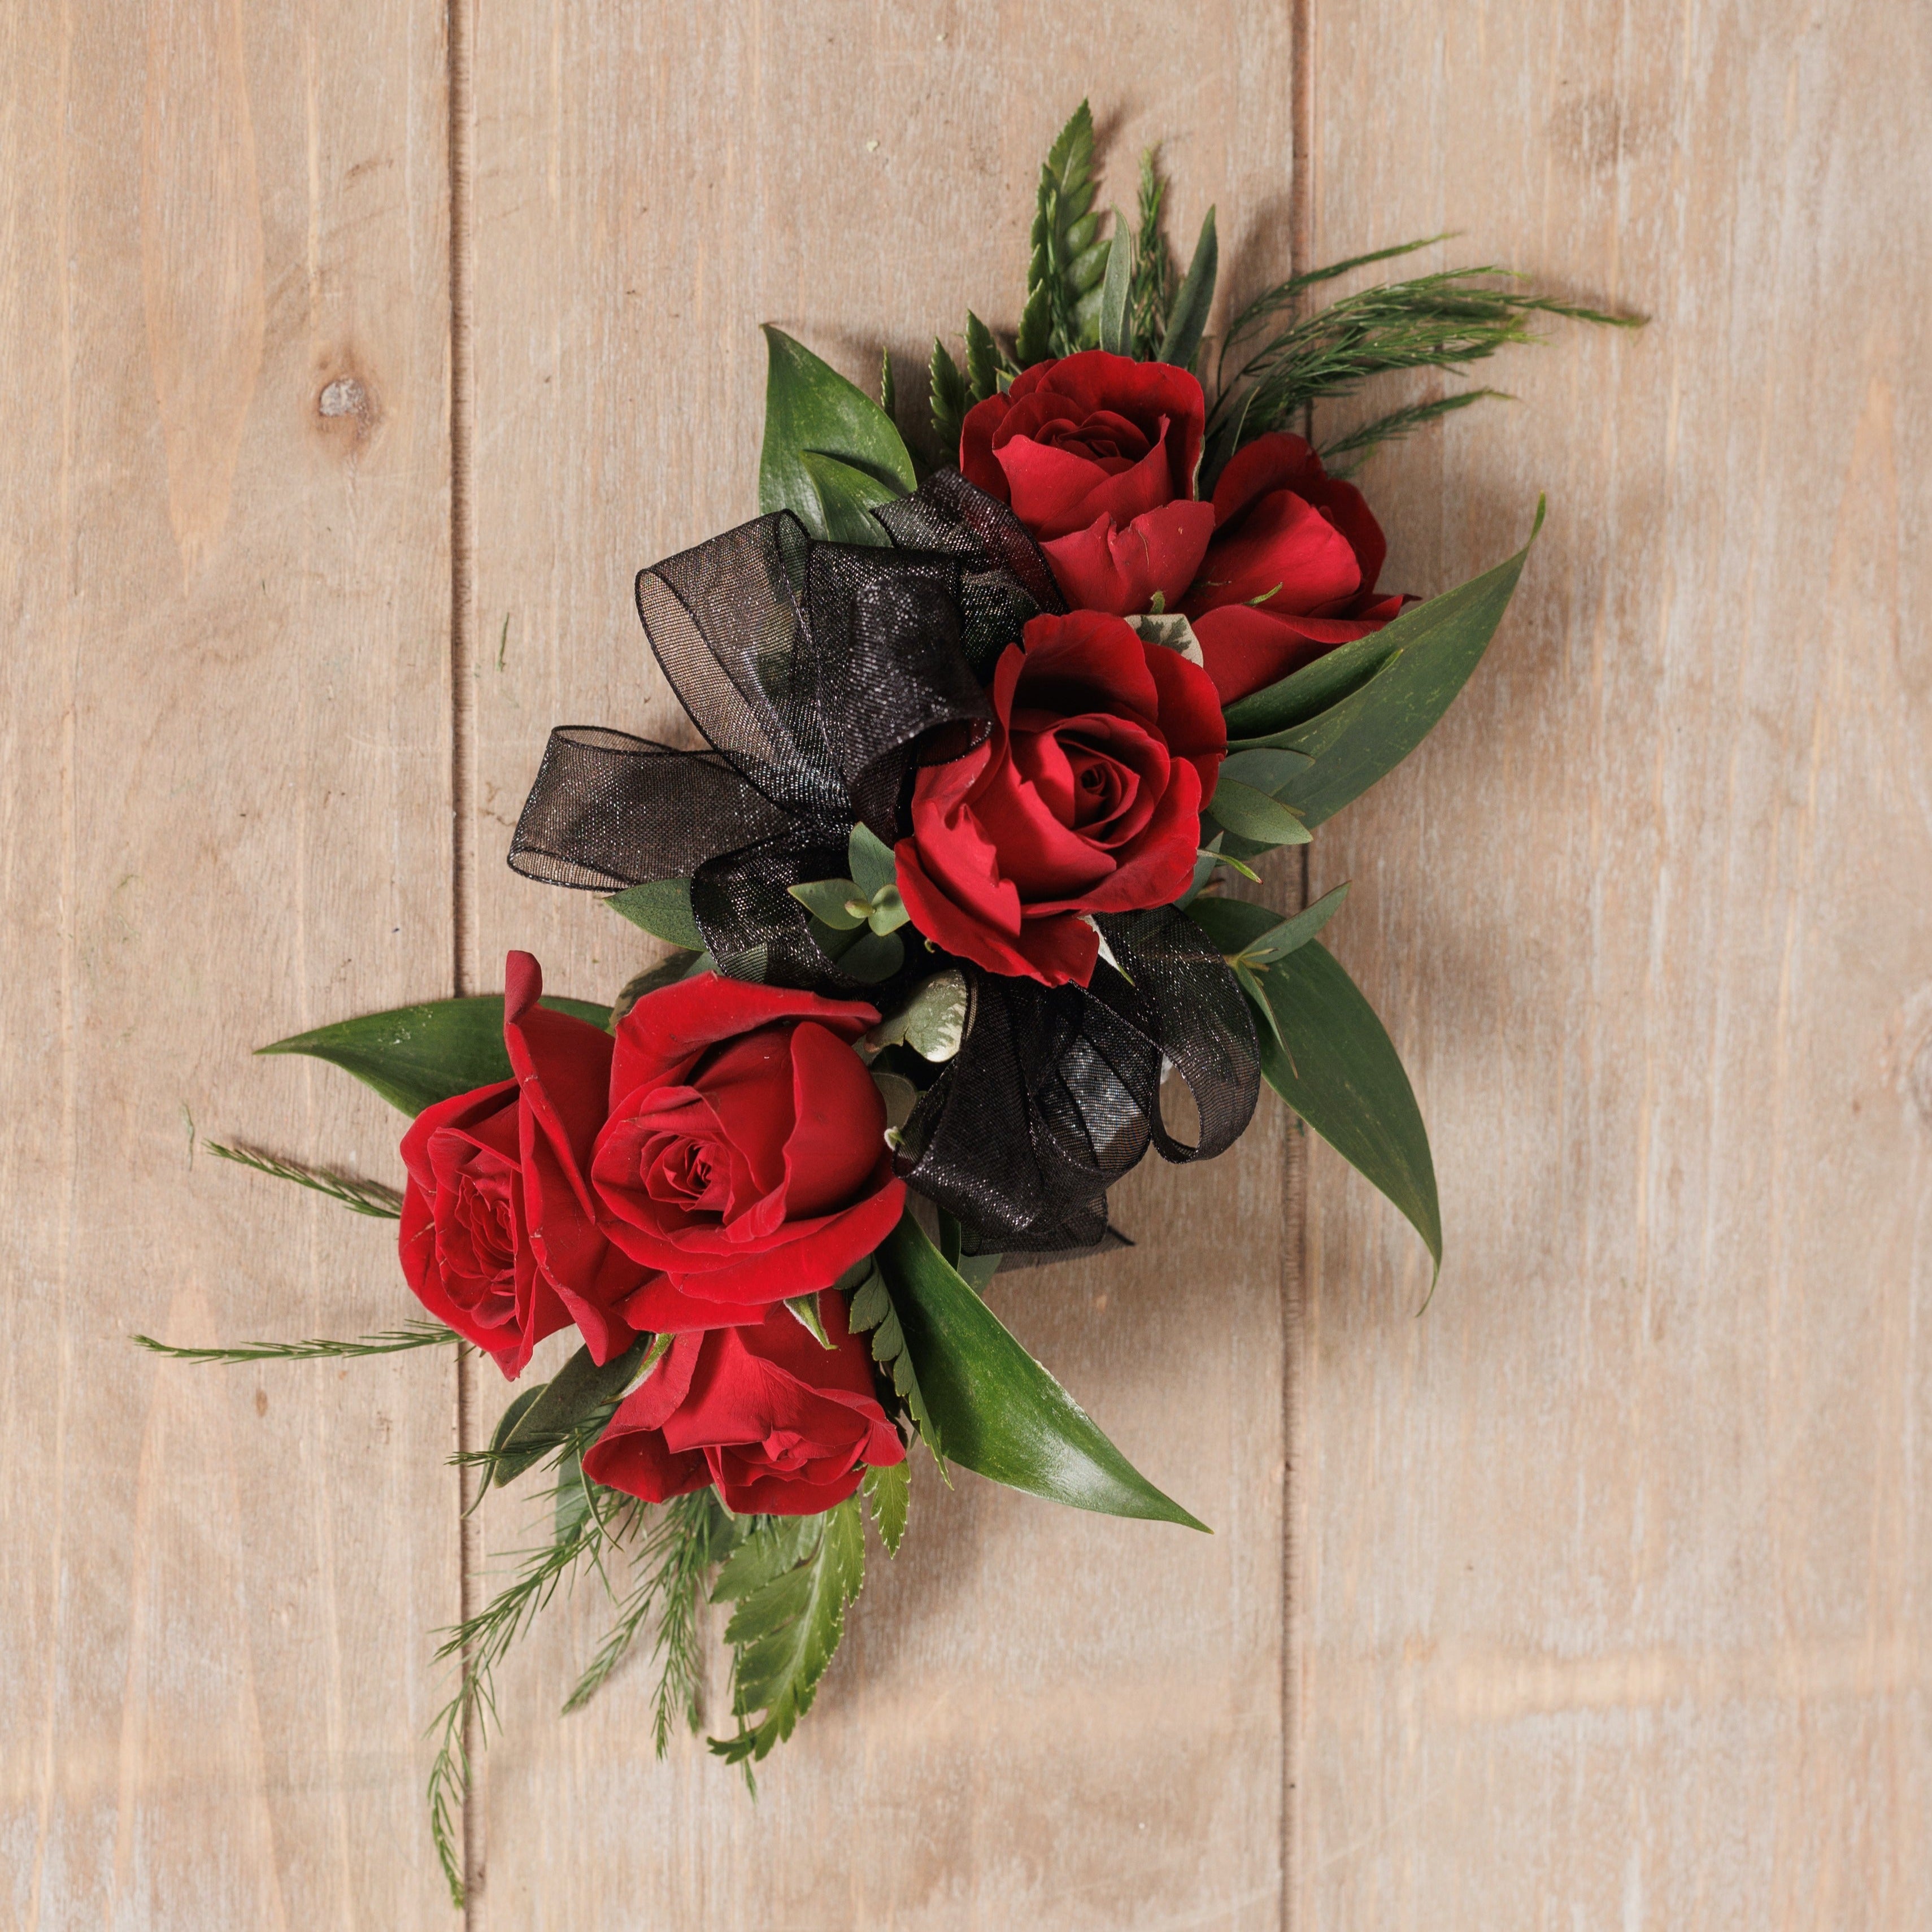 A wrist corsage with red spray roses and black ribbon.